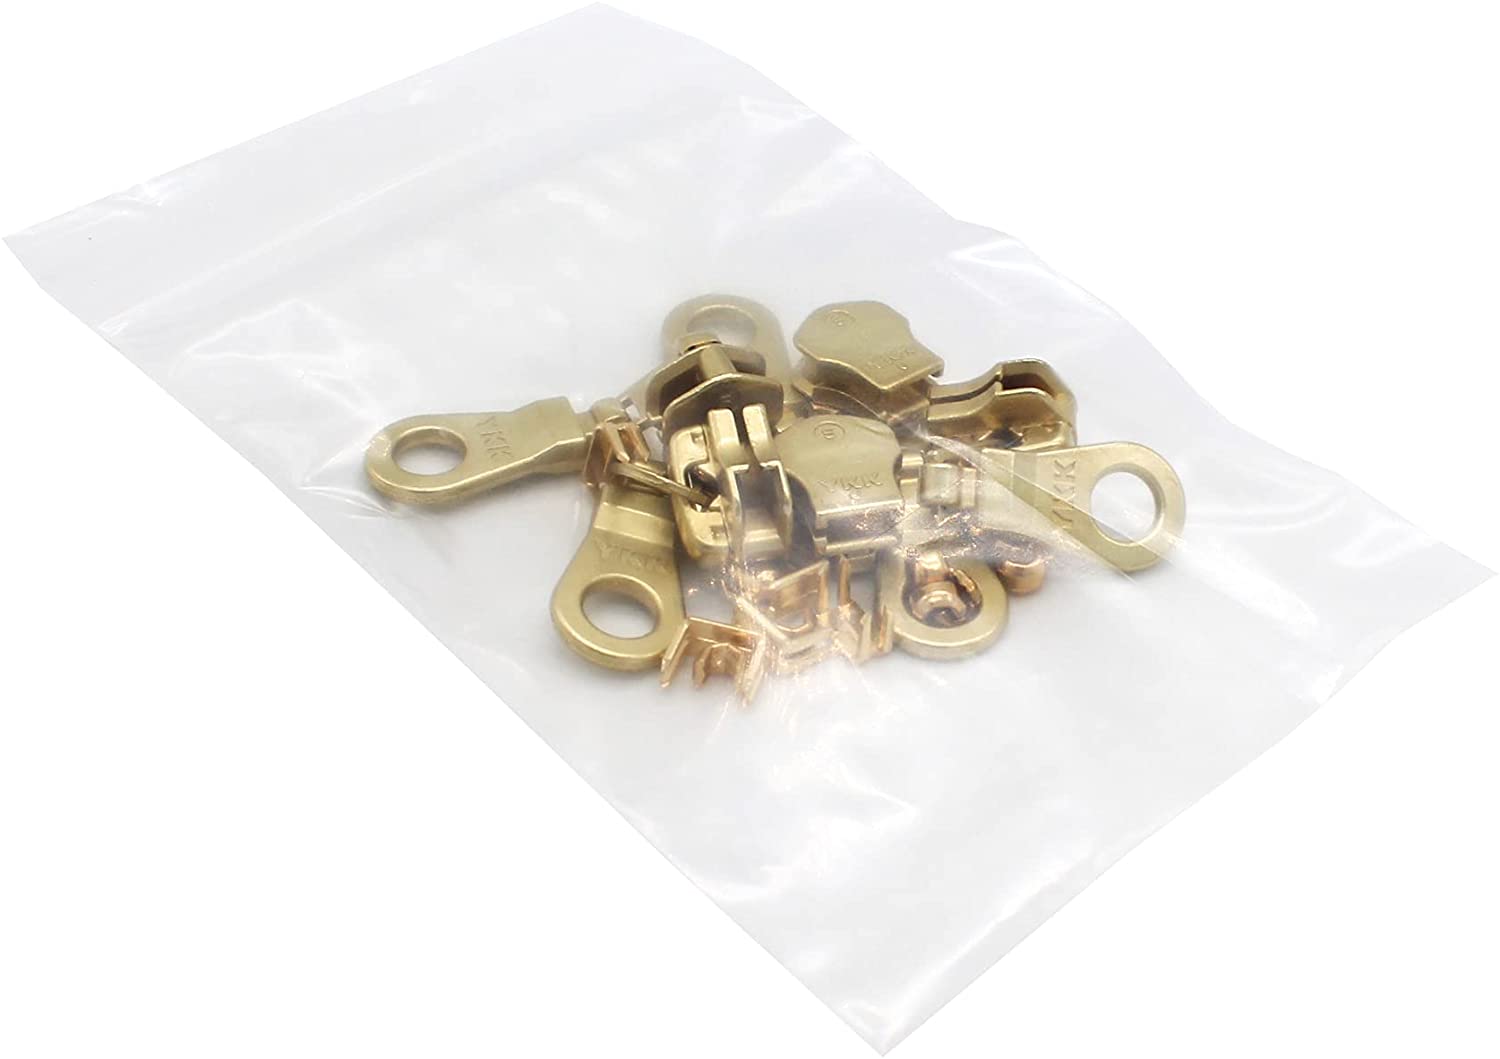 Zipper Repair Kit - #5 YKK Antique Brass Auto Lock Sliders - 5 Sliders Per  Pack with Top & Bottom Stoppers Included - Made in The United States 